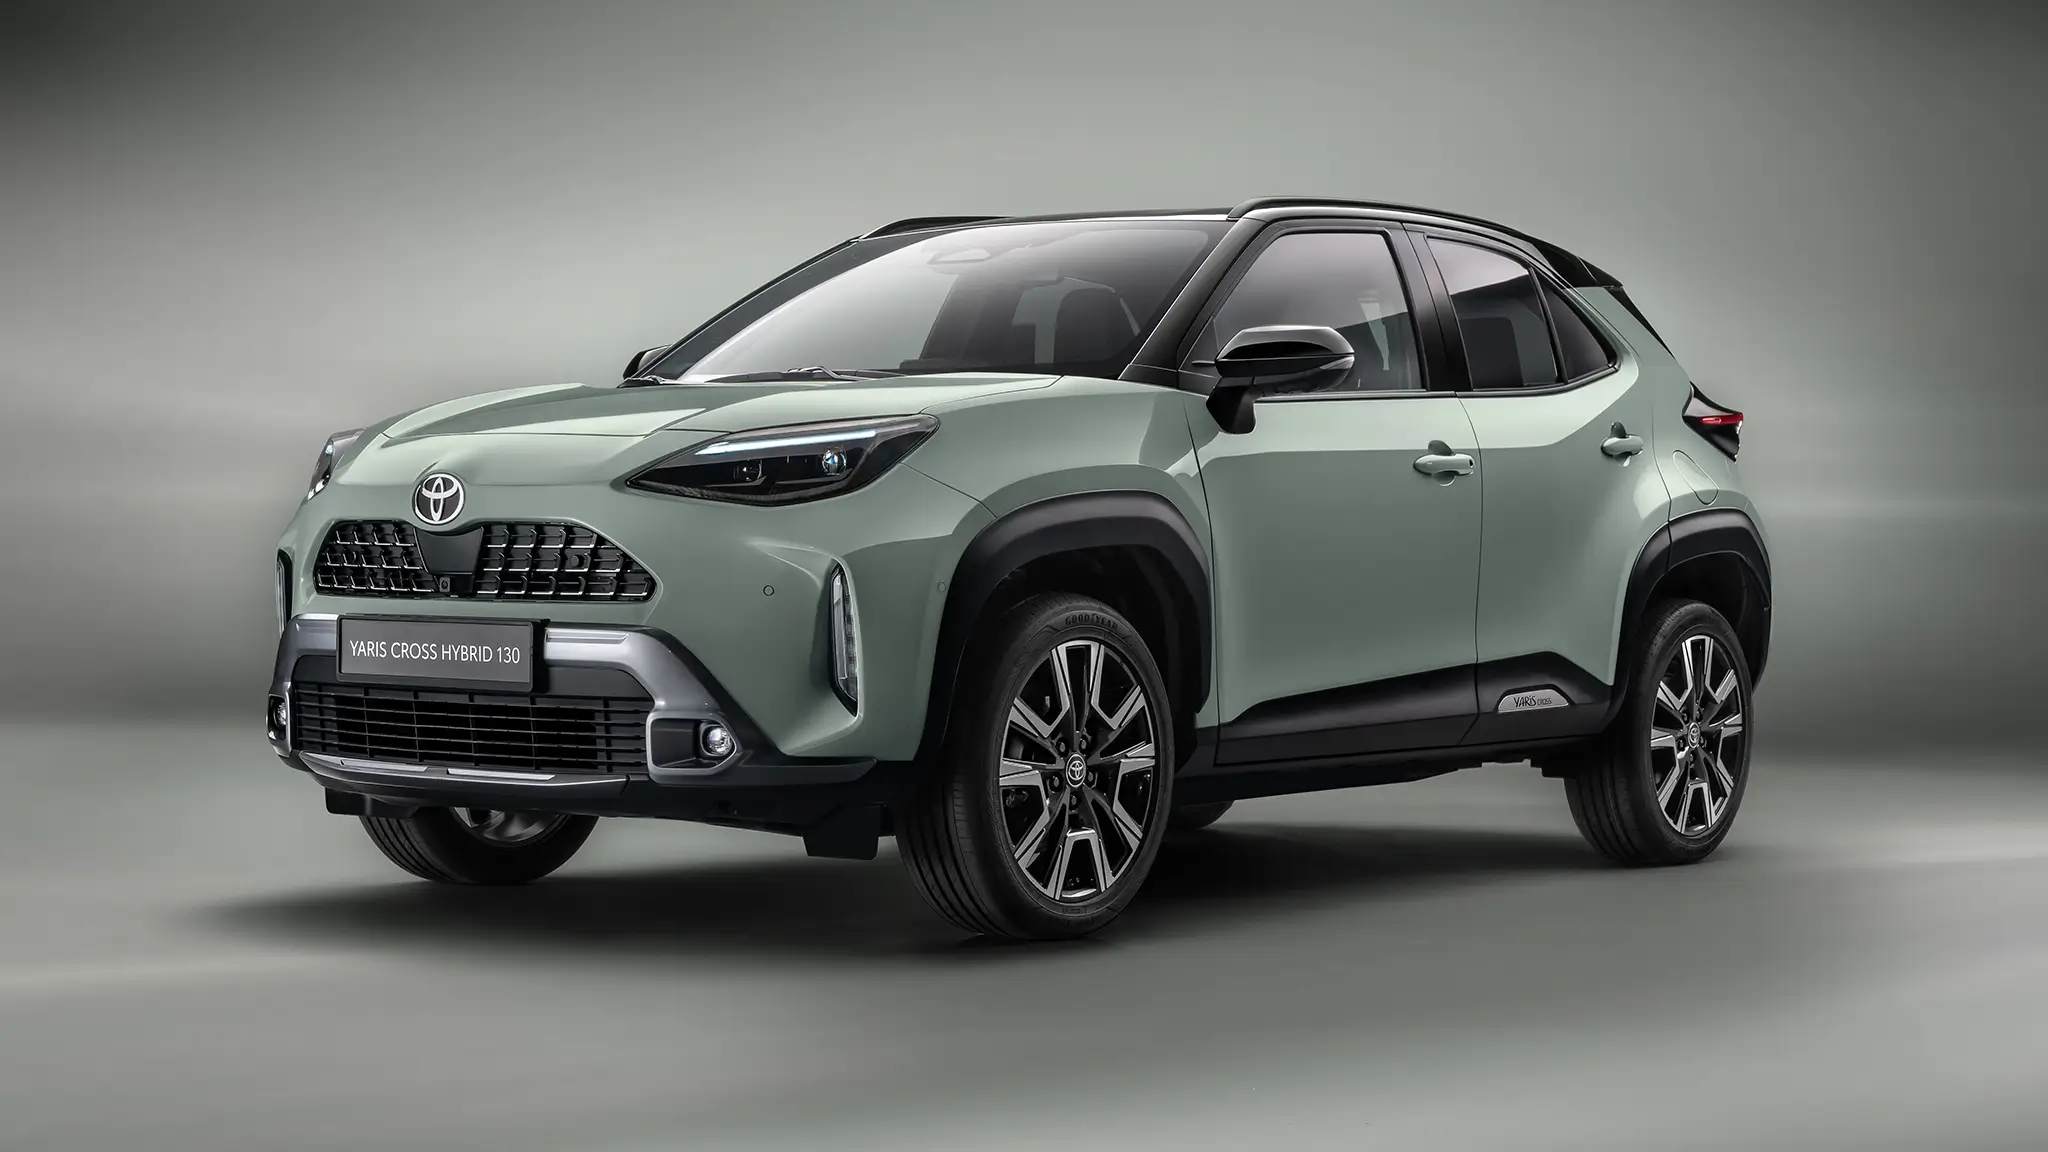 Toyota Yaris Cross gets a more powerful hybrid engine and brings more new features